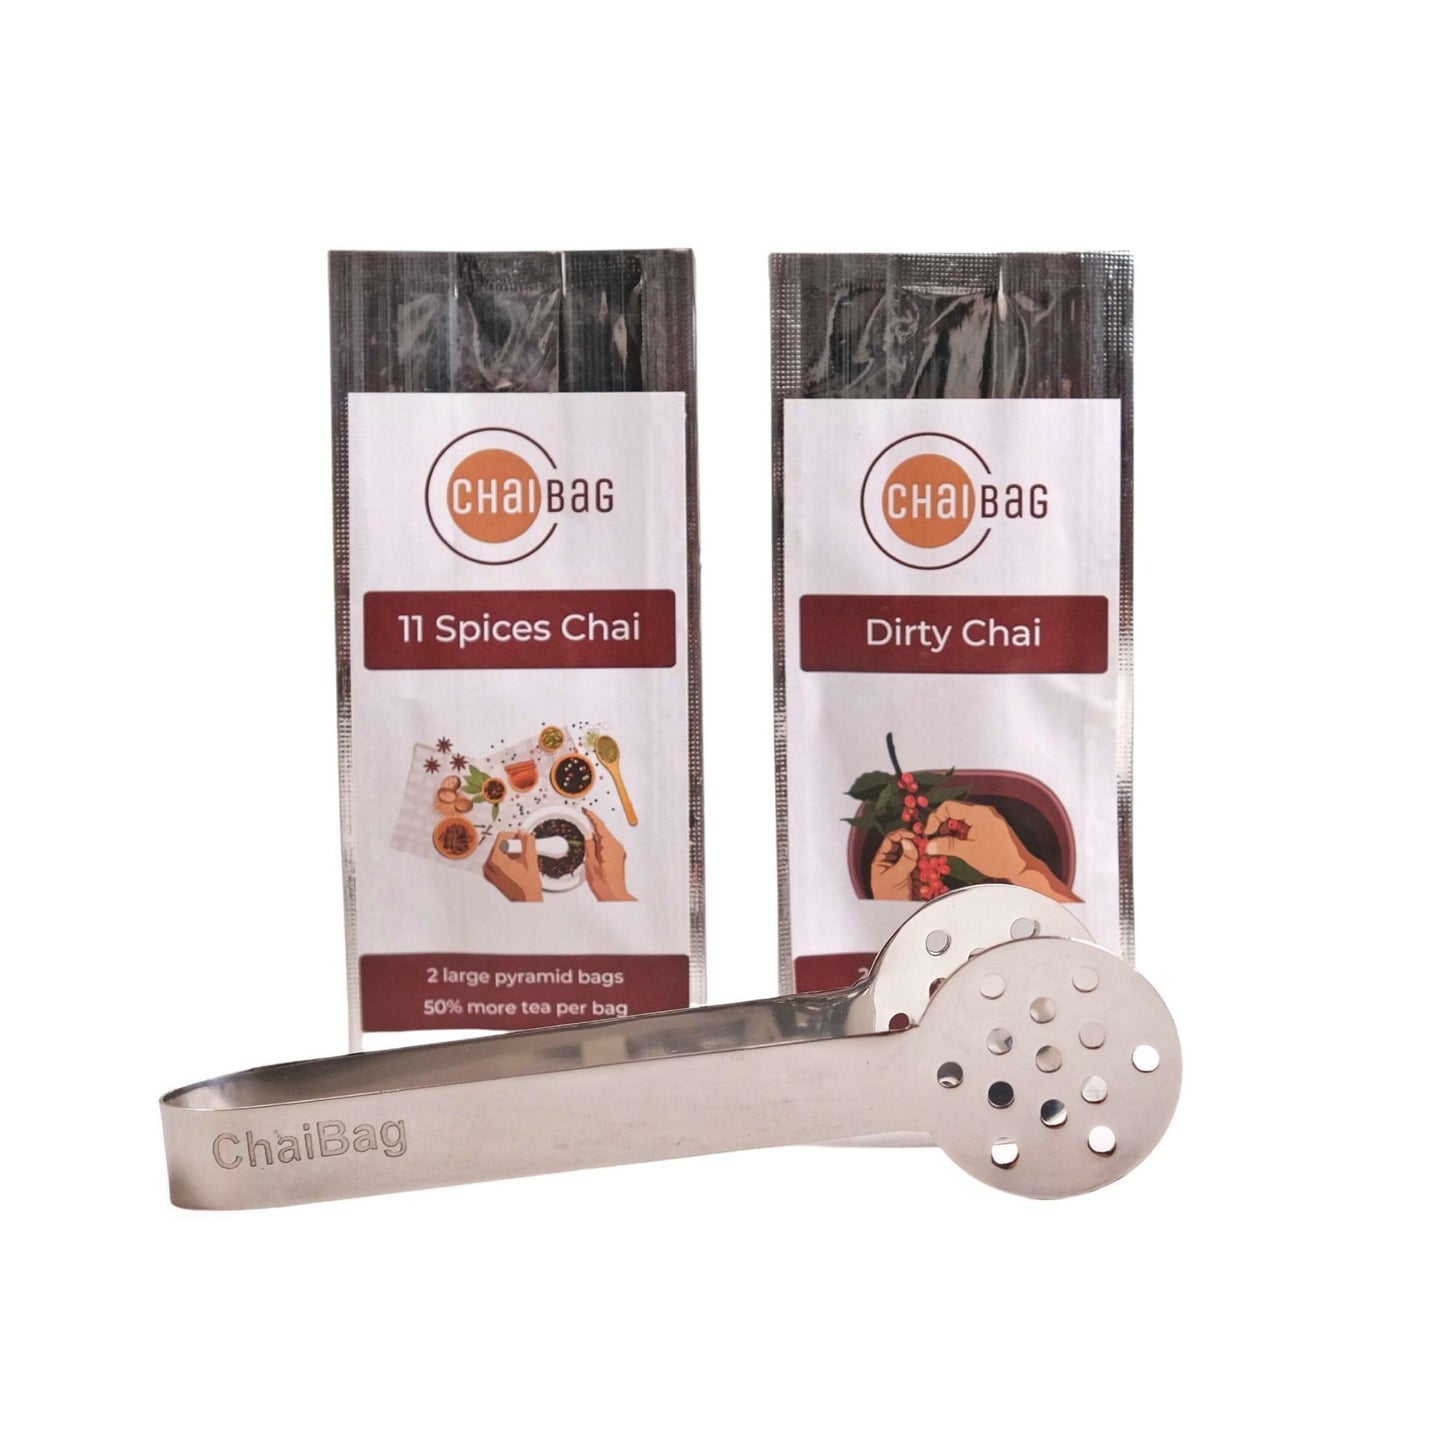 11 Spices Chai Sample & Dirty Chai Sample with Tea Bag Squeezer - ChaiBag